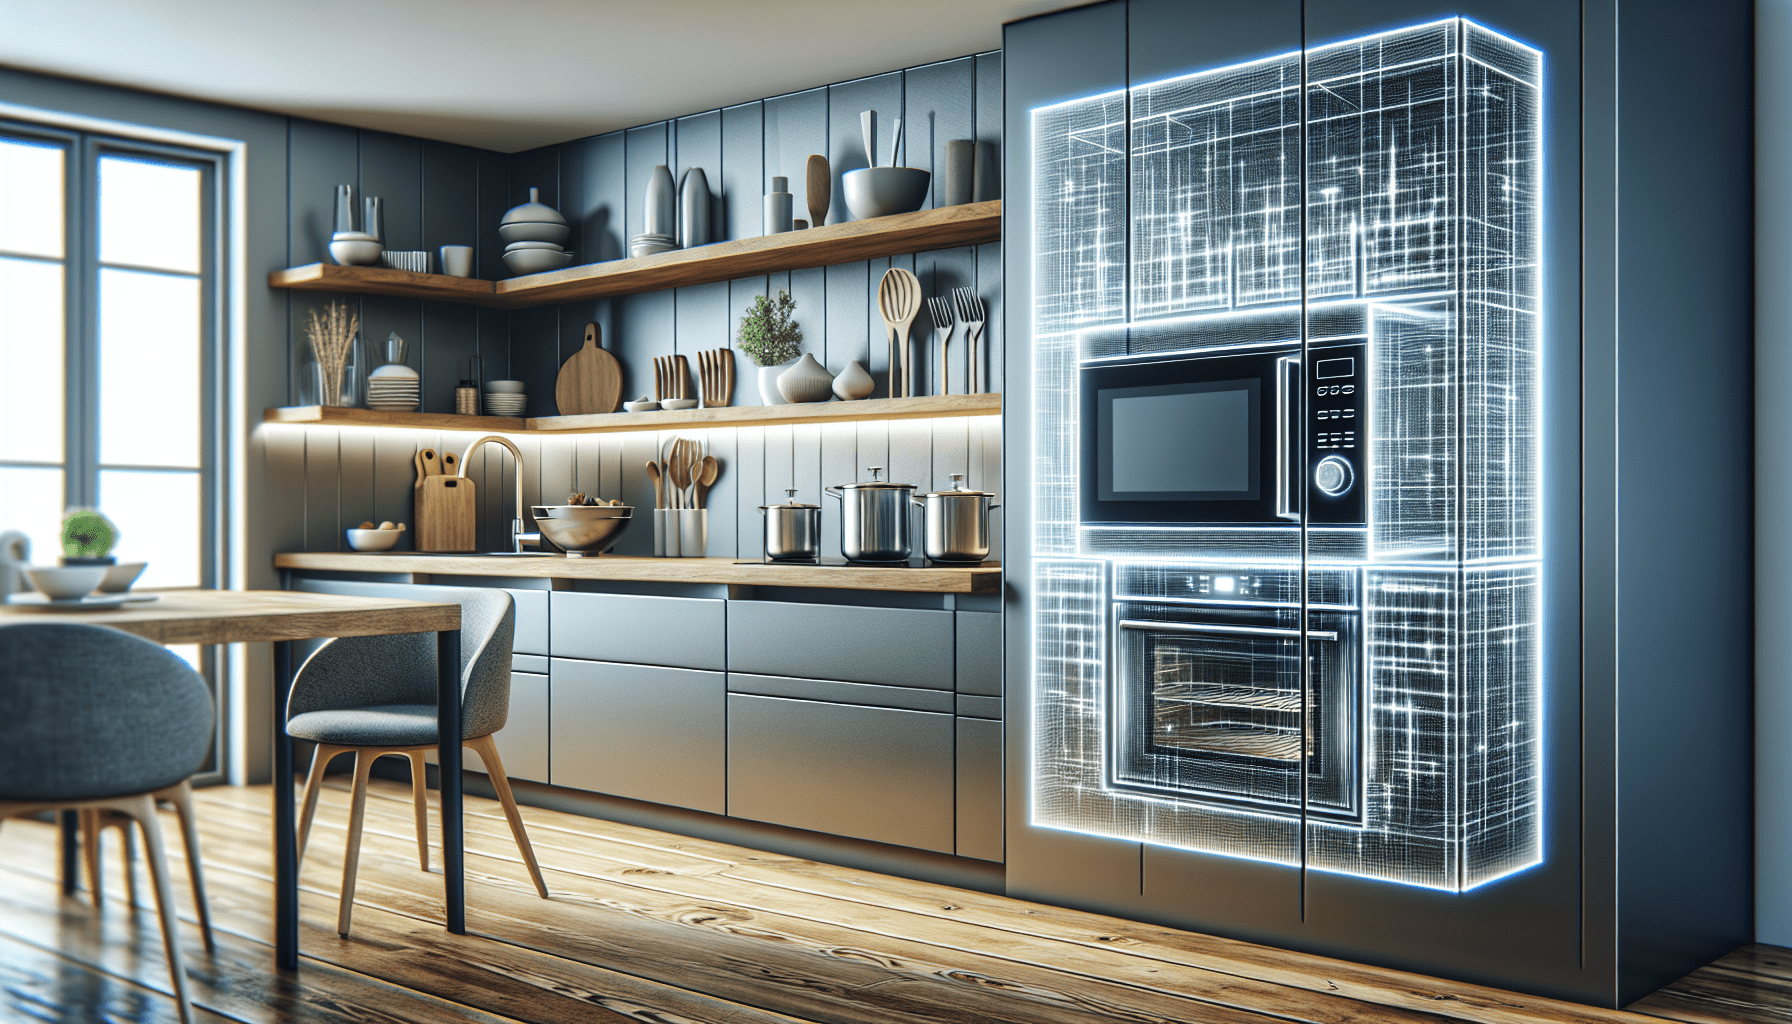 What Are The Disadvantages Of Built-in Microwaves?